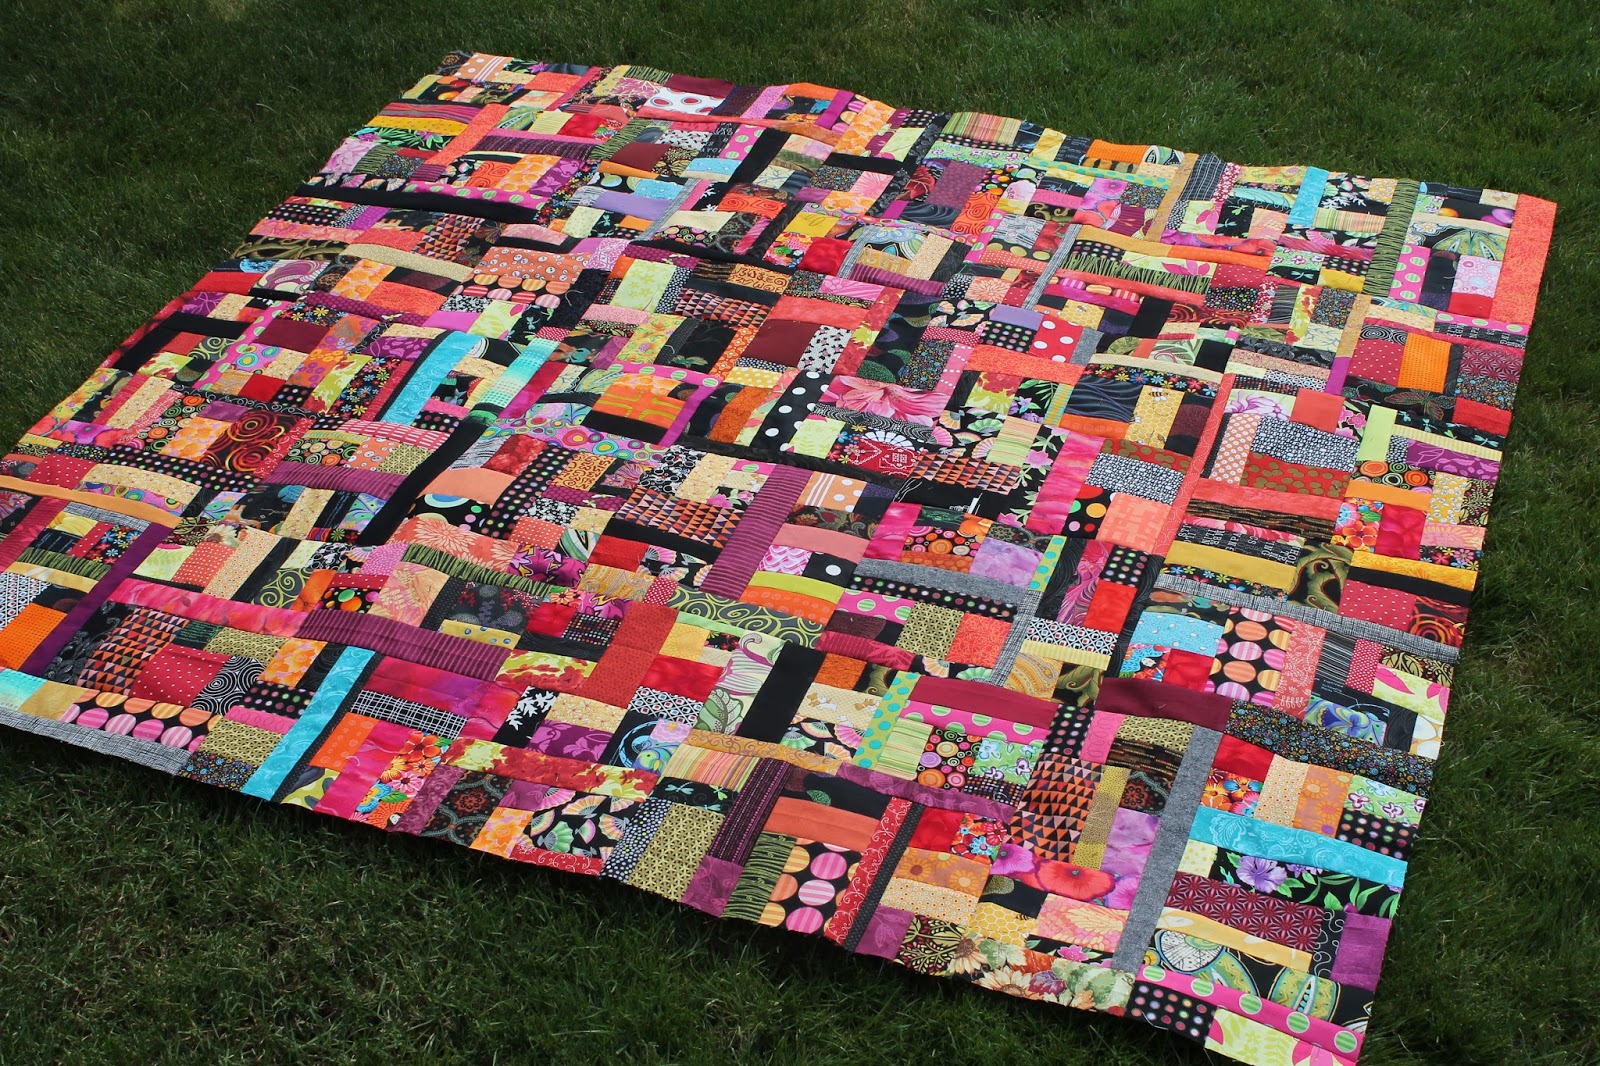 I have no idea how many pieces of fabric are in this quilt top but it measu...